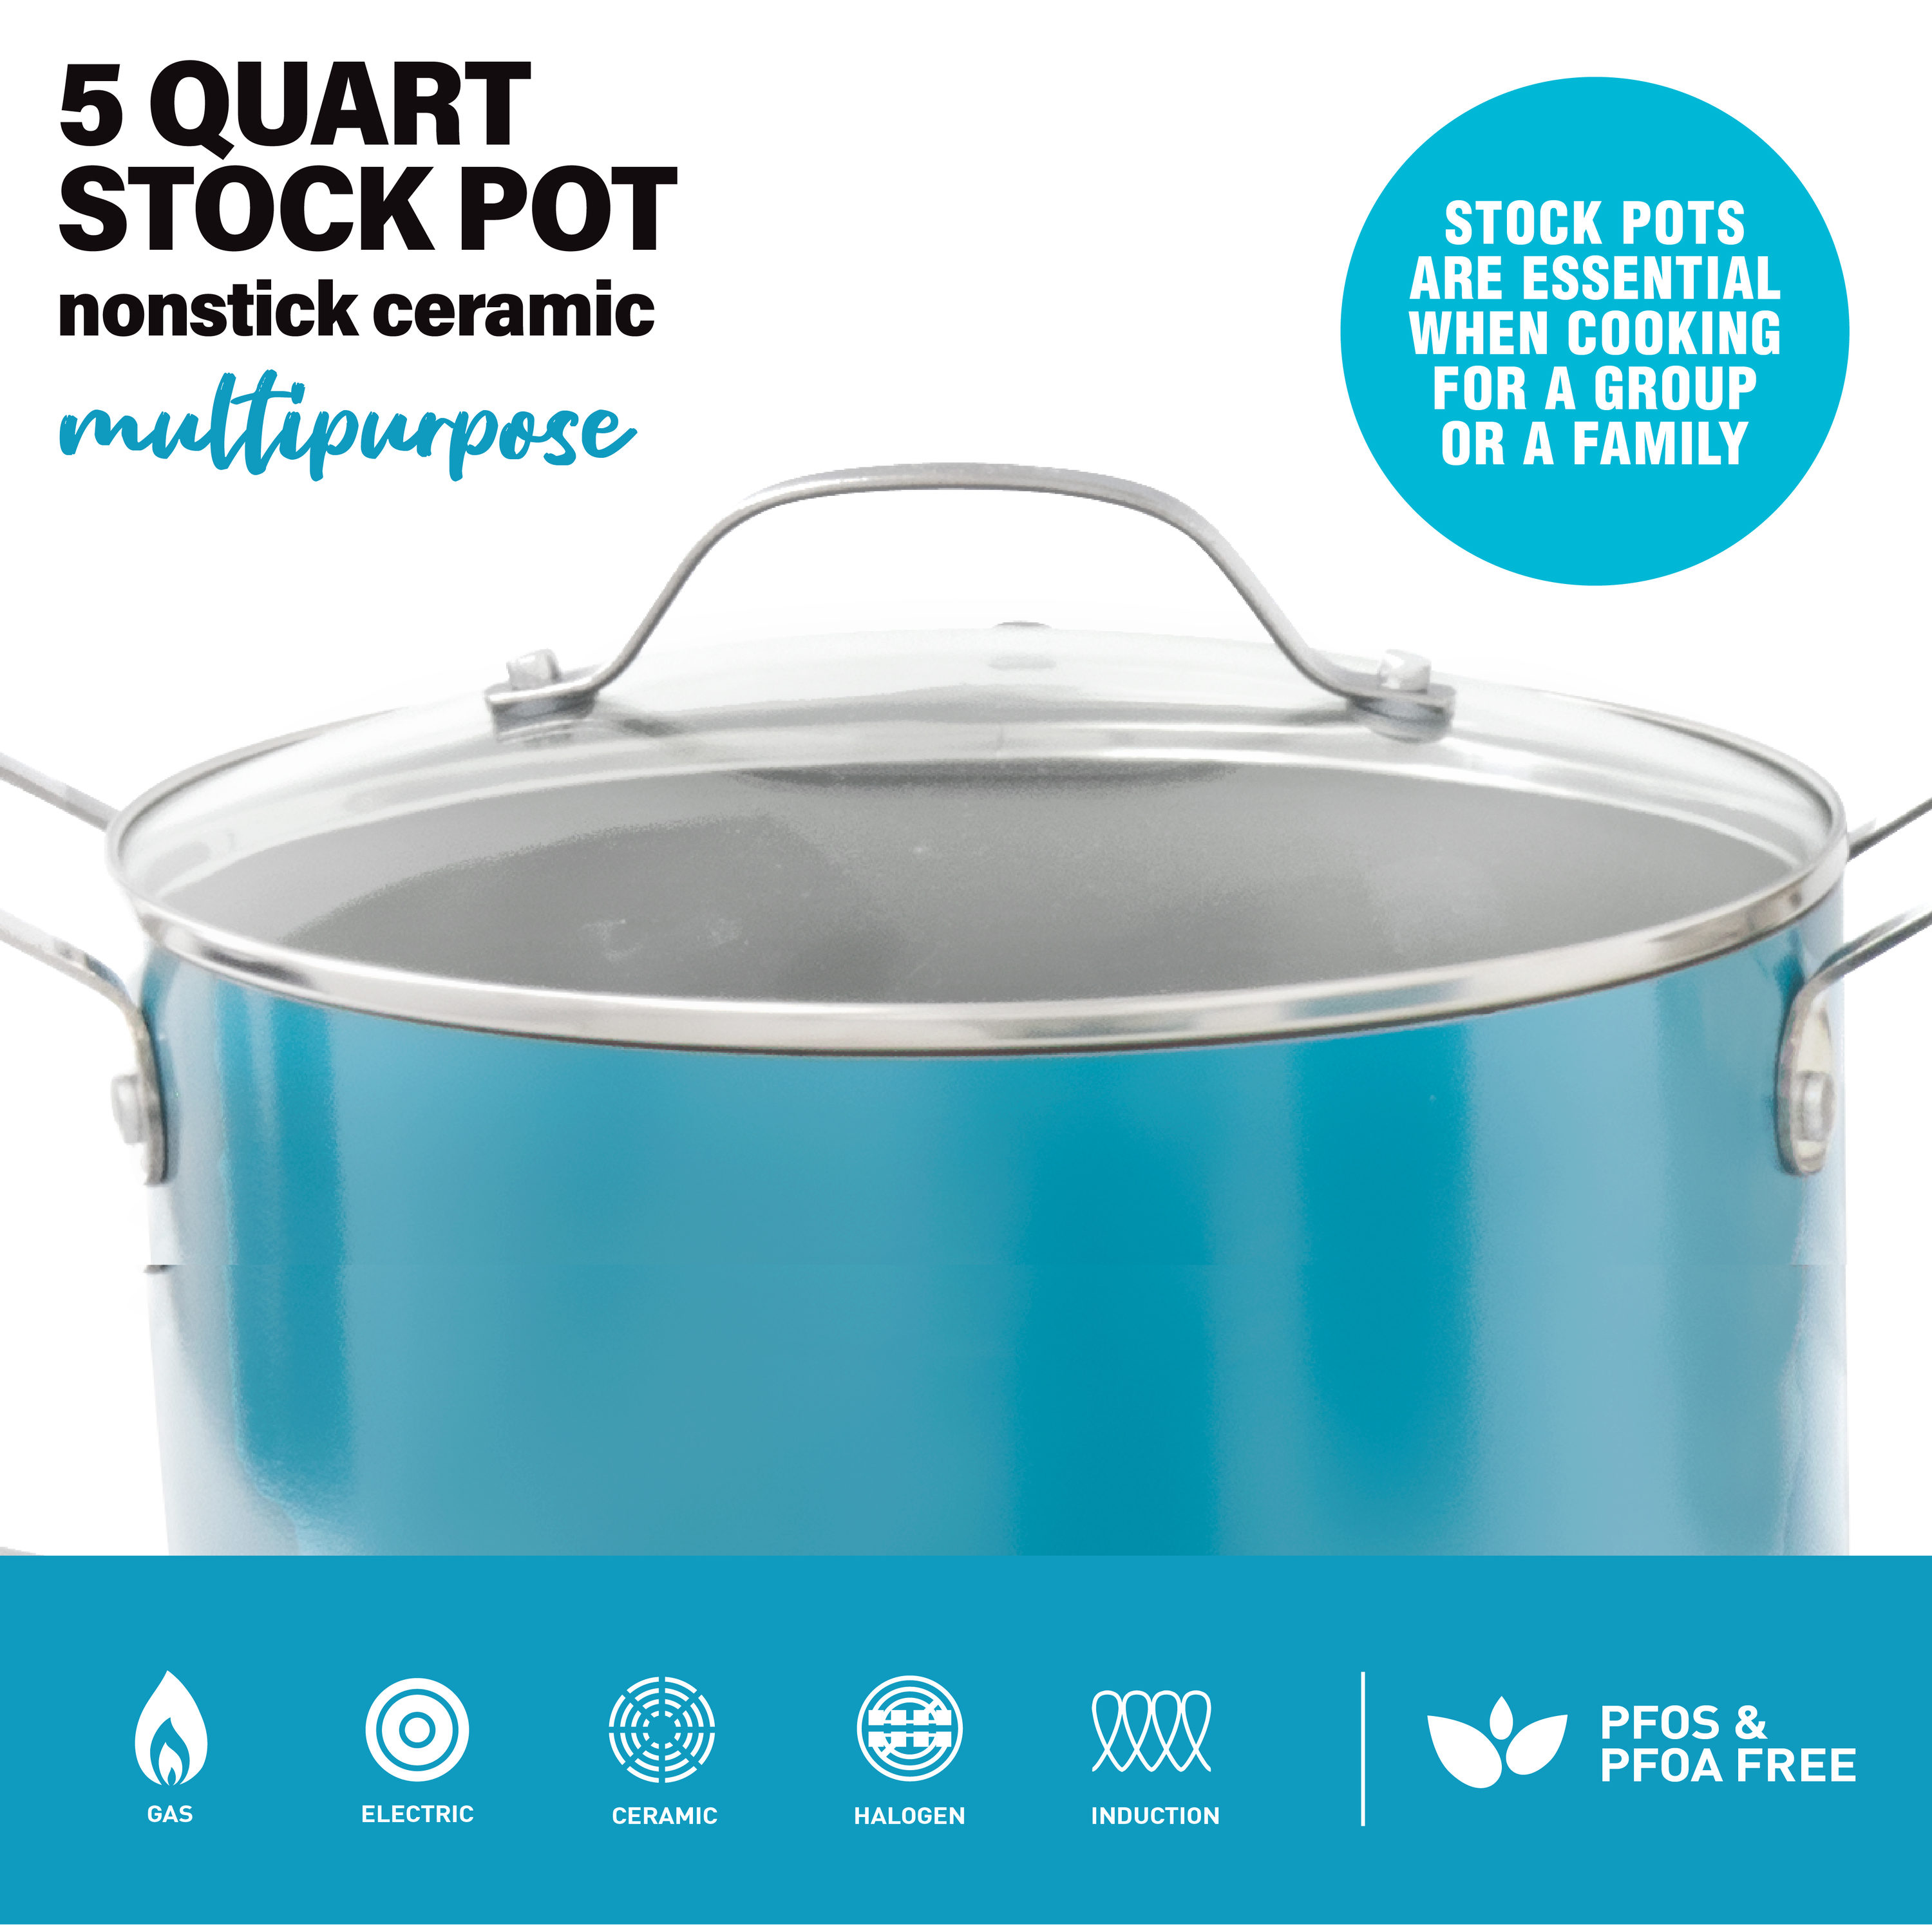 GOTHAM STEEL Ocean Blue 3-Quart Stock Pot with Ultra Durable Diamond Coating-Oven & Dishwasher Safe 100% PFOA Free Includes Tempered Glass Lid